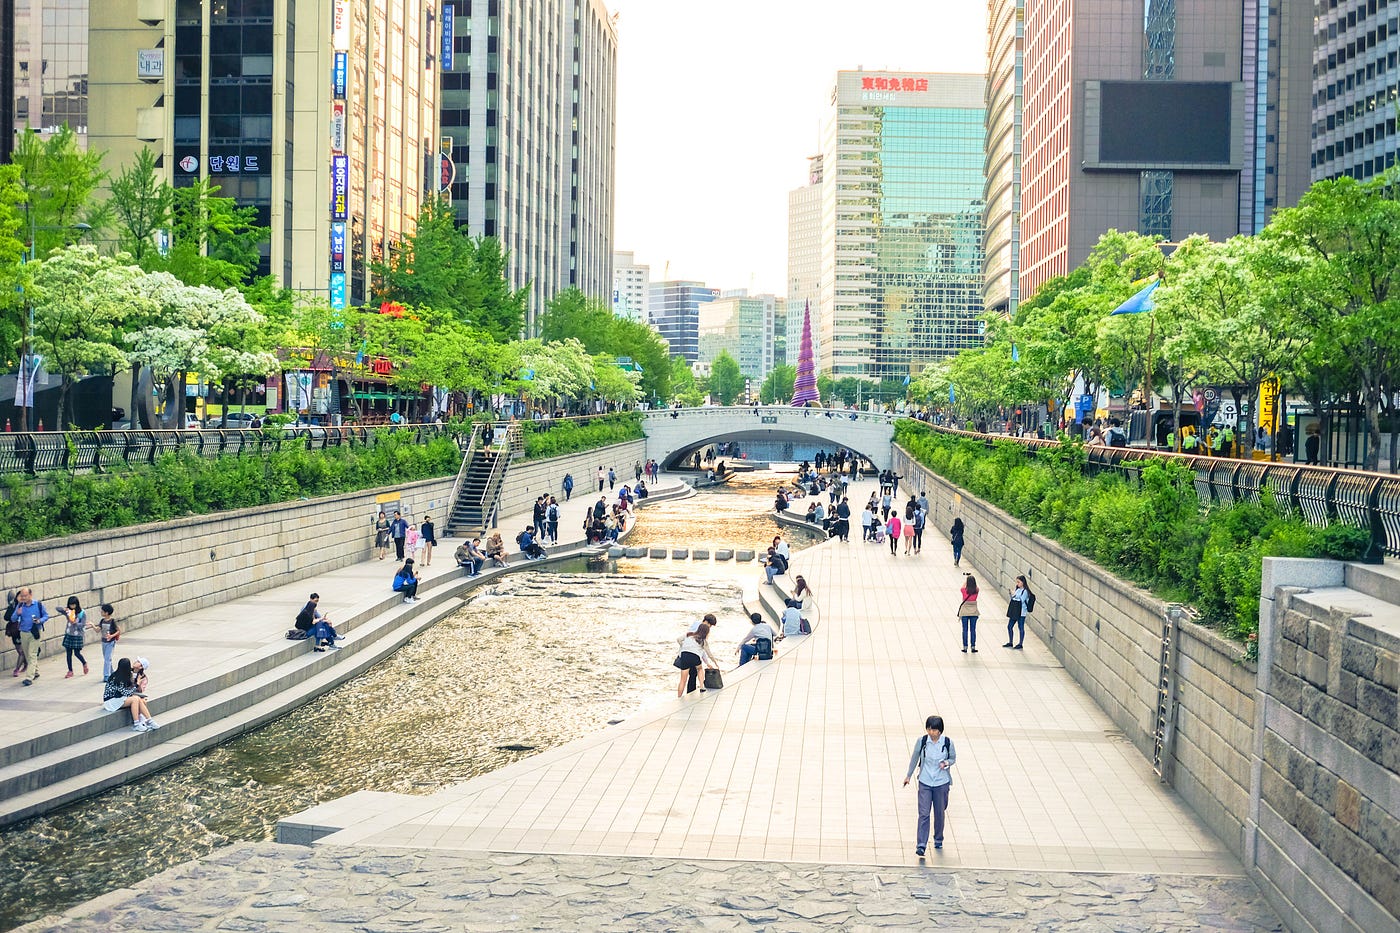 A reconstructed canal in the middle of the city of Seoul in South Korea where people are relaxing after a long day of work